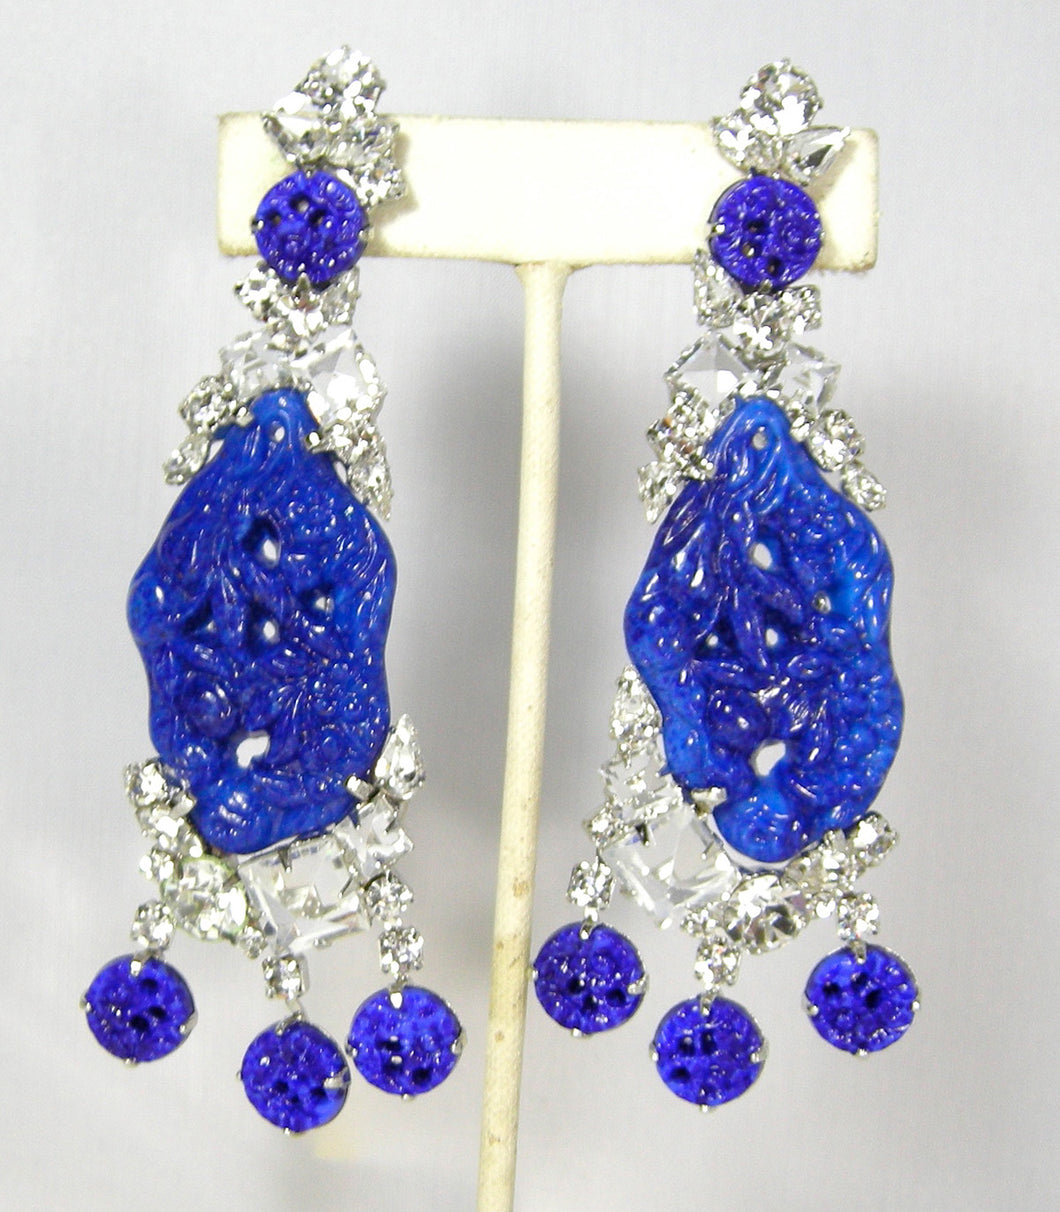 Signed Robert Sorrell “One-Of-A-Kind” Faux Blue Lapis Dangling Earring  - JD10330